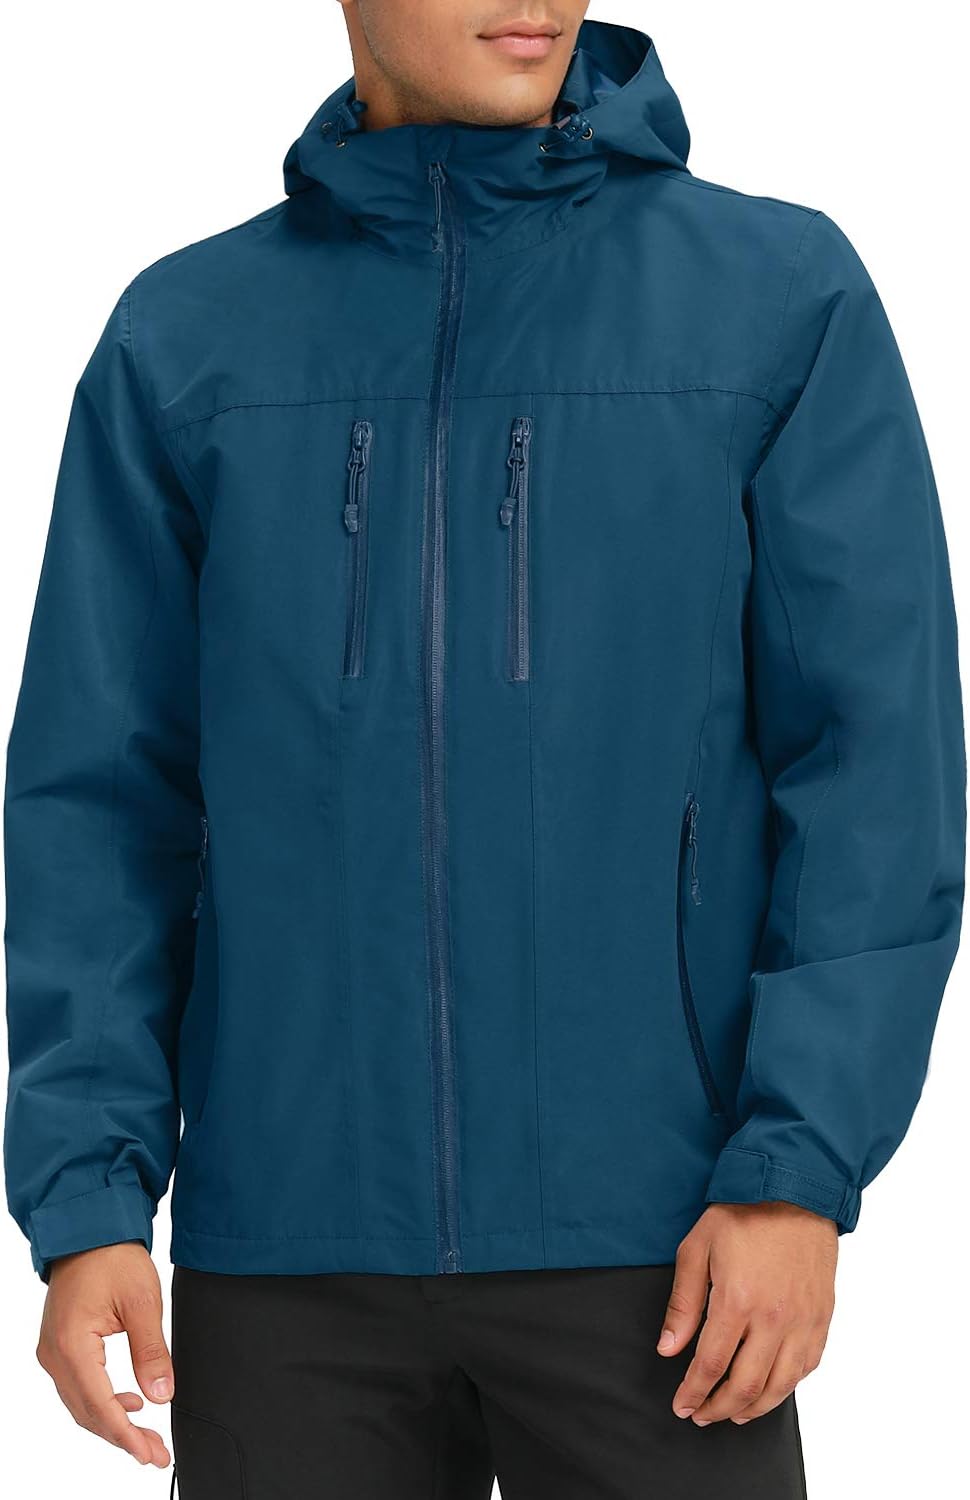 Good jacket, wind proof, water proof, works great as a rain coat only gripe and its small is the zipper is on the wrong side, like I mentioned its small, but still throws you off when you go to zip it